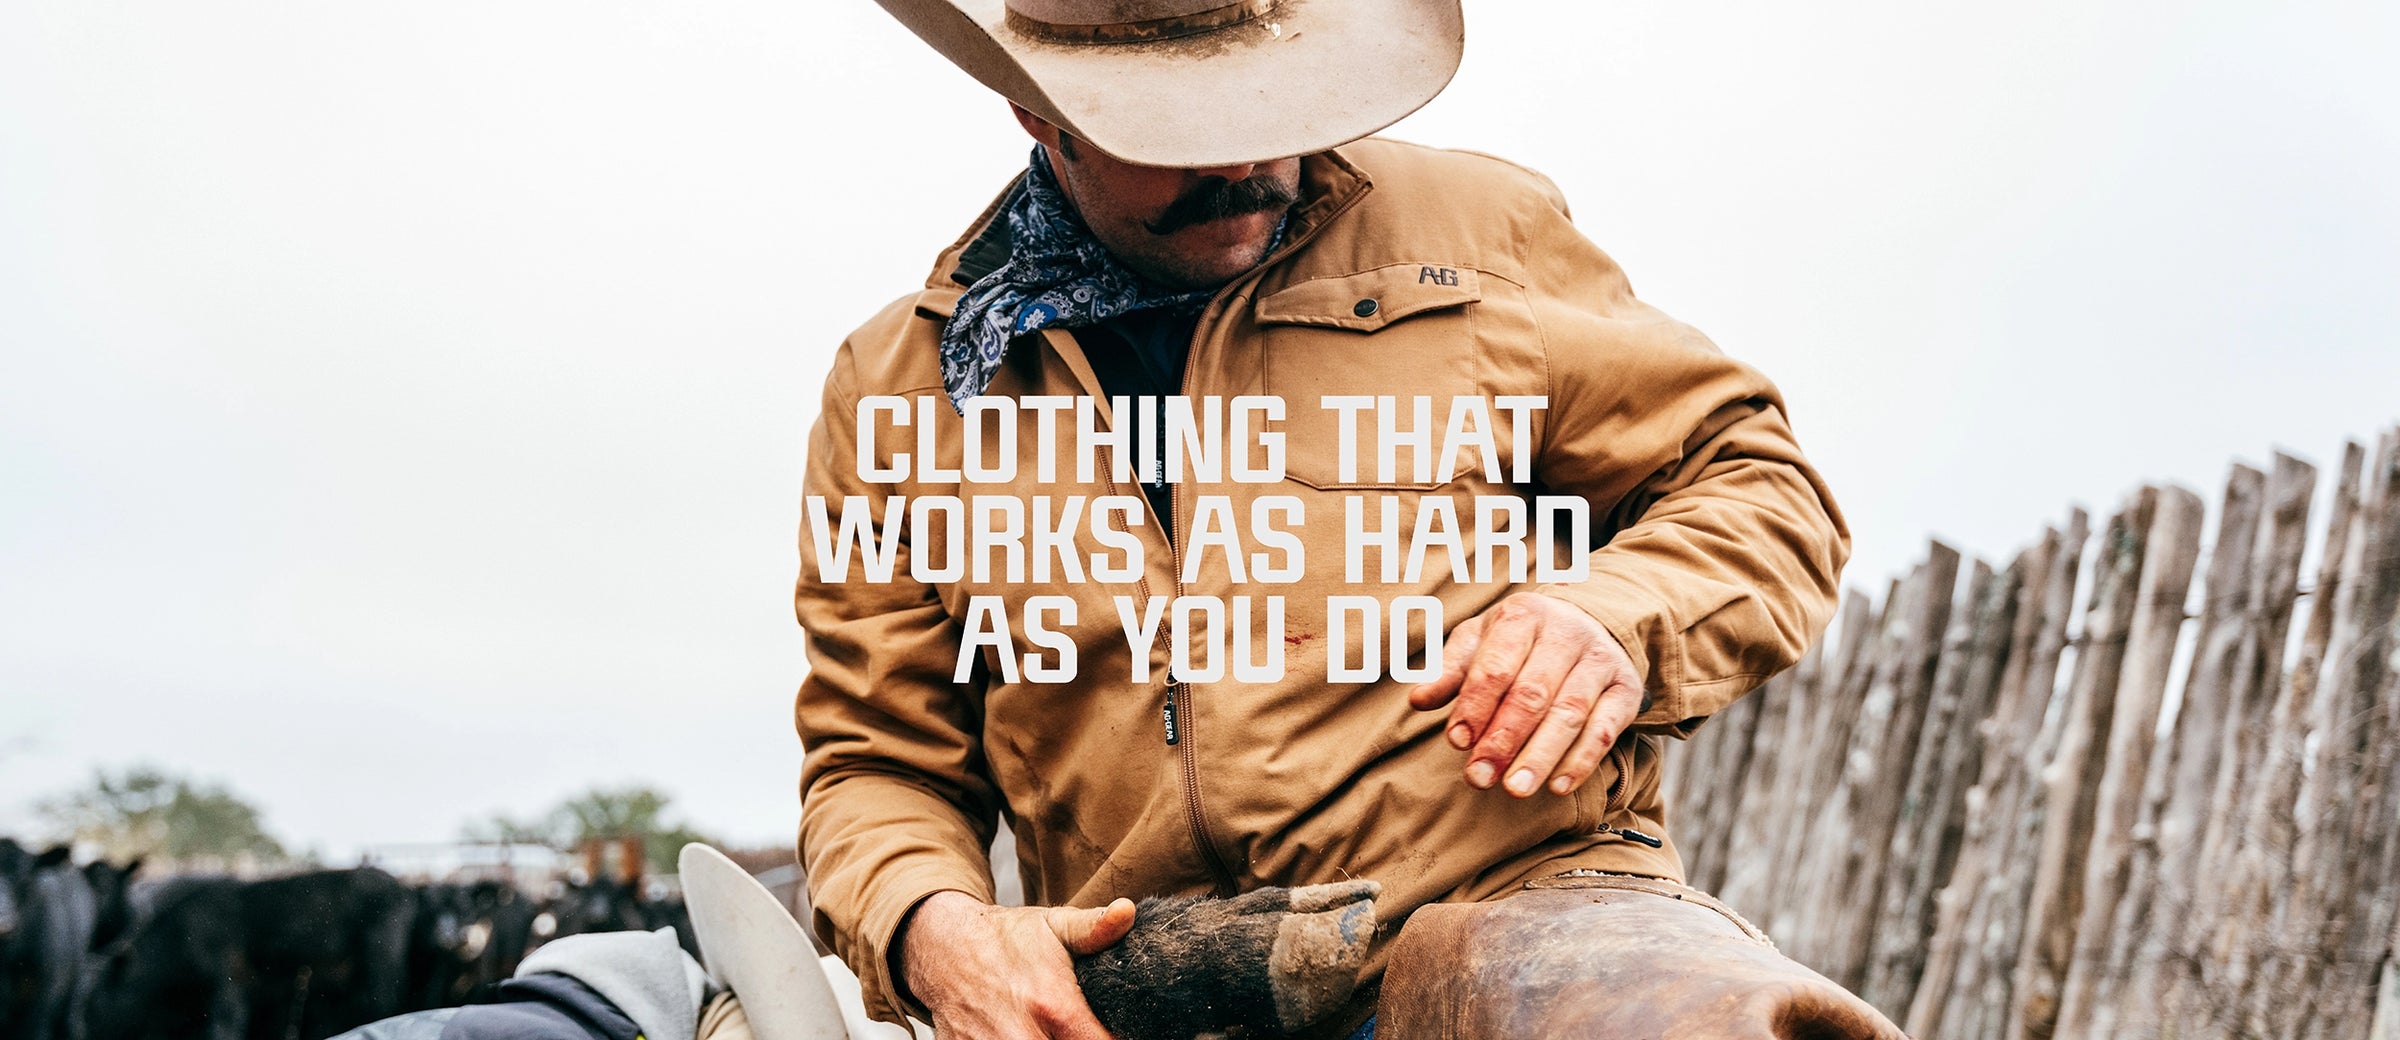 Ag-Gear - Be Authentic - No Better Life! . . . #aggear #aggearclothing  #authentic #countryliving #countrylife #farming #agriculture #workwear